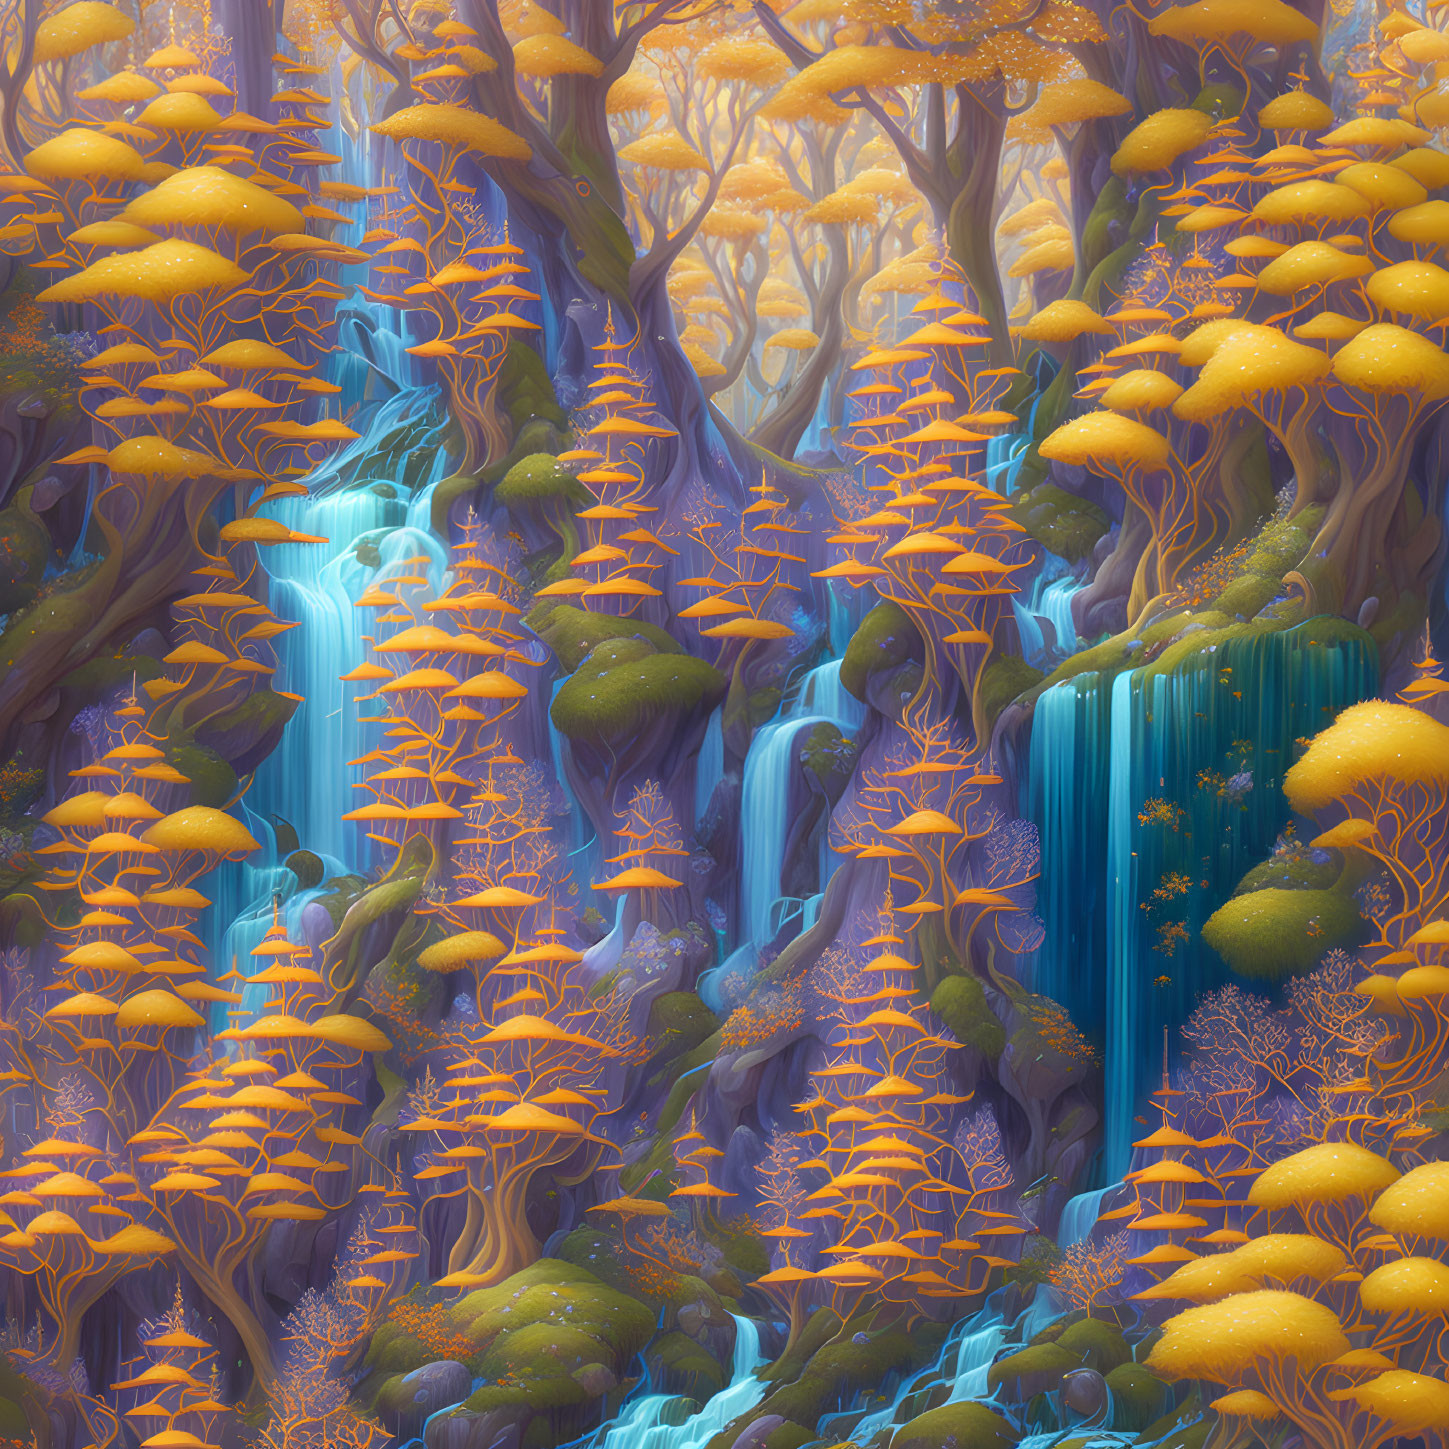 Enchanting forest scene with golden-yellow trees, blue waterfall, and moss-covered rocks